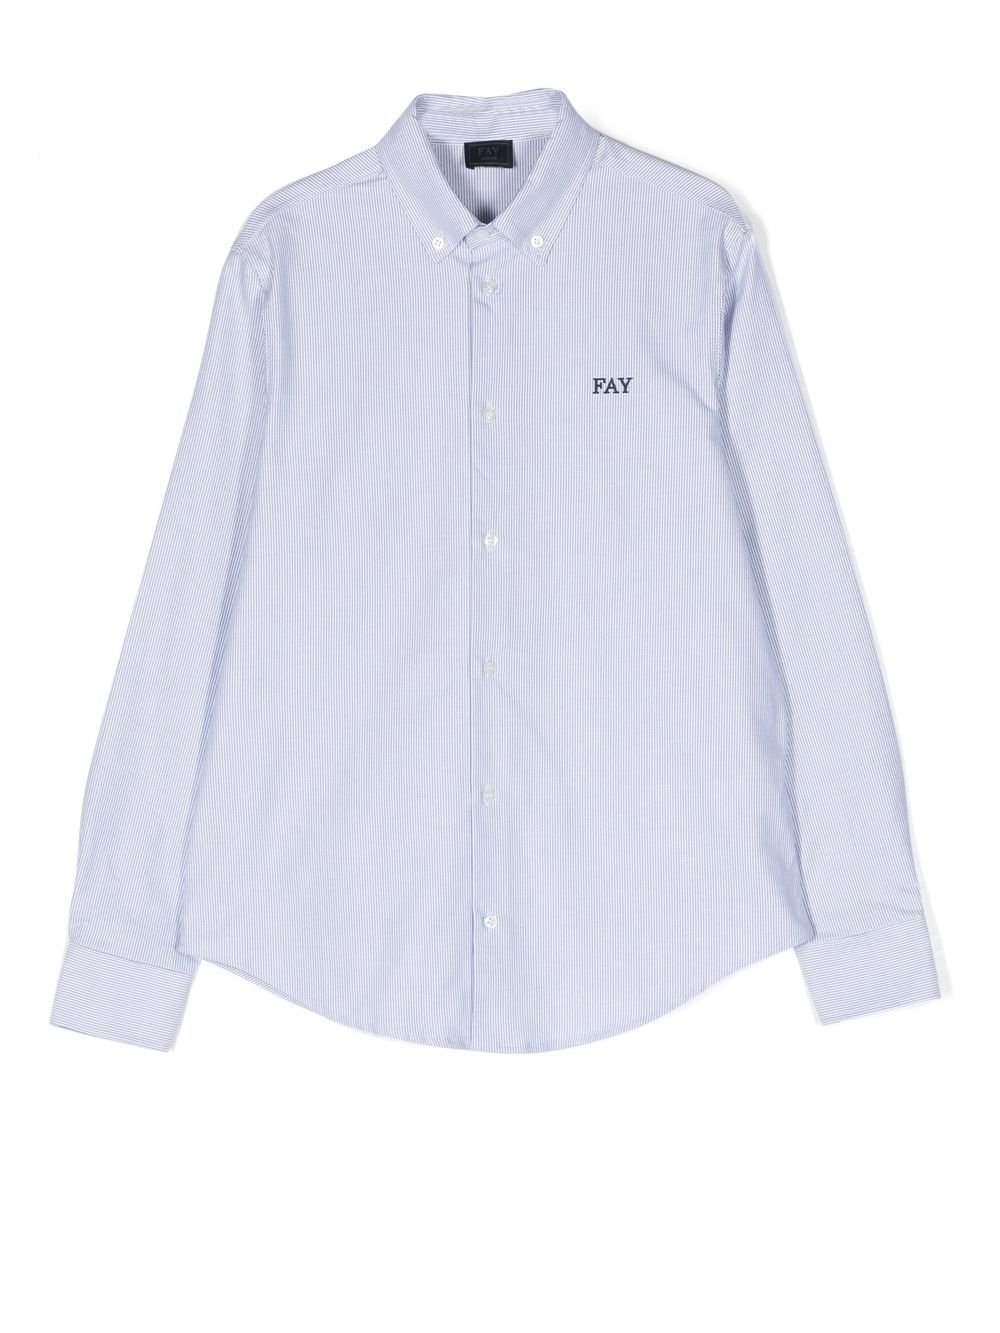 Blue and white shirt for boys